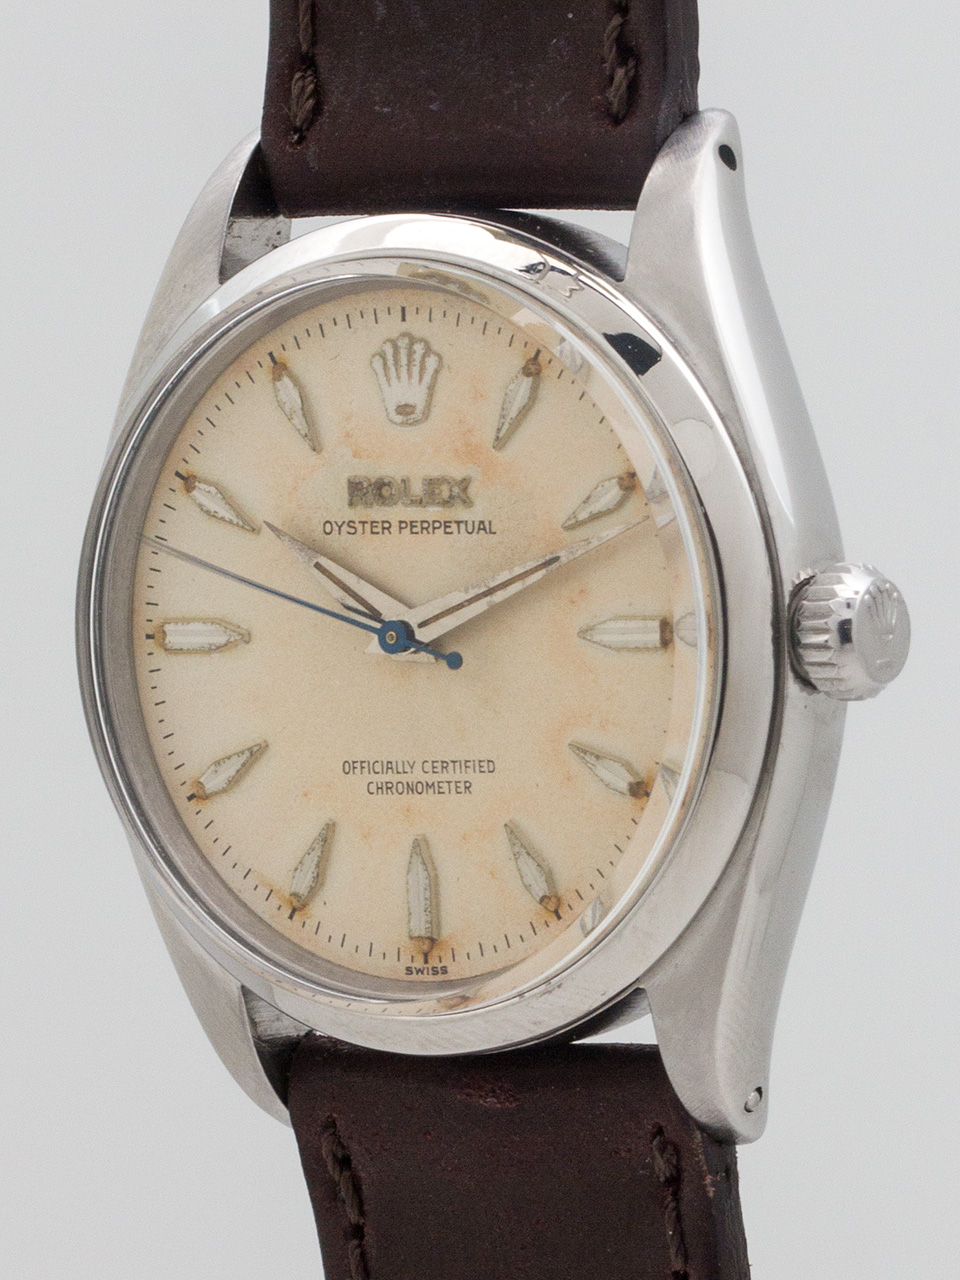 Rolex Oyster Perpetual ref 6564 